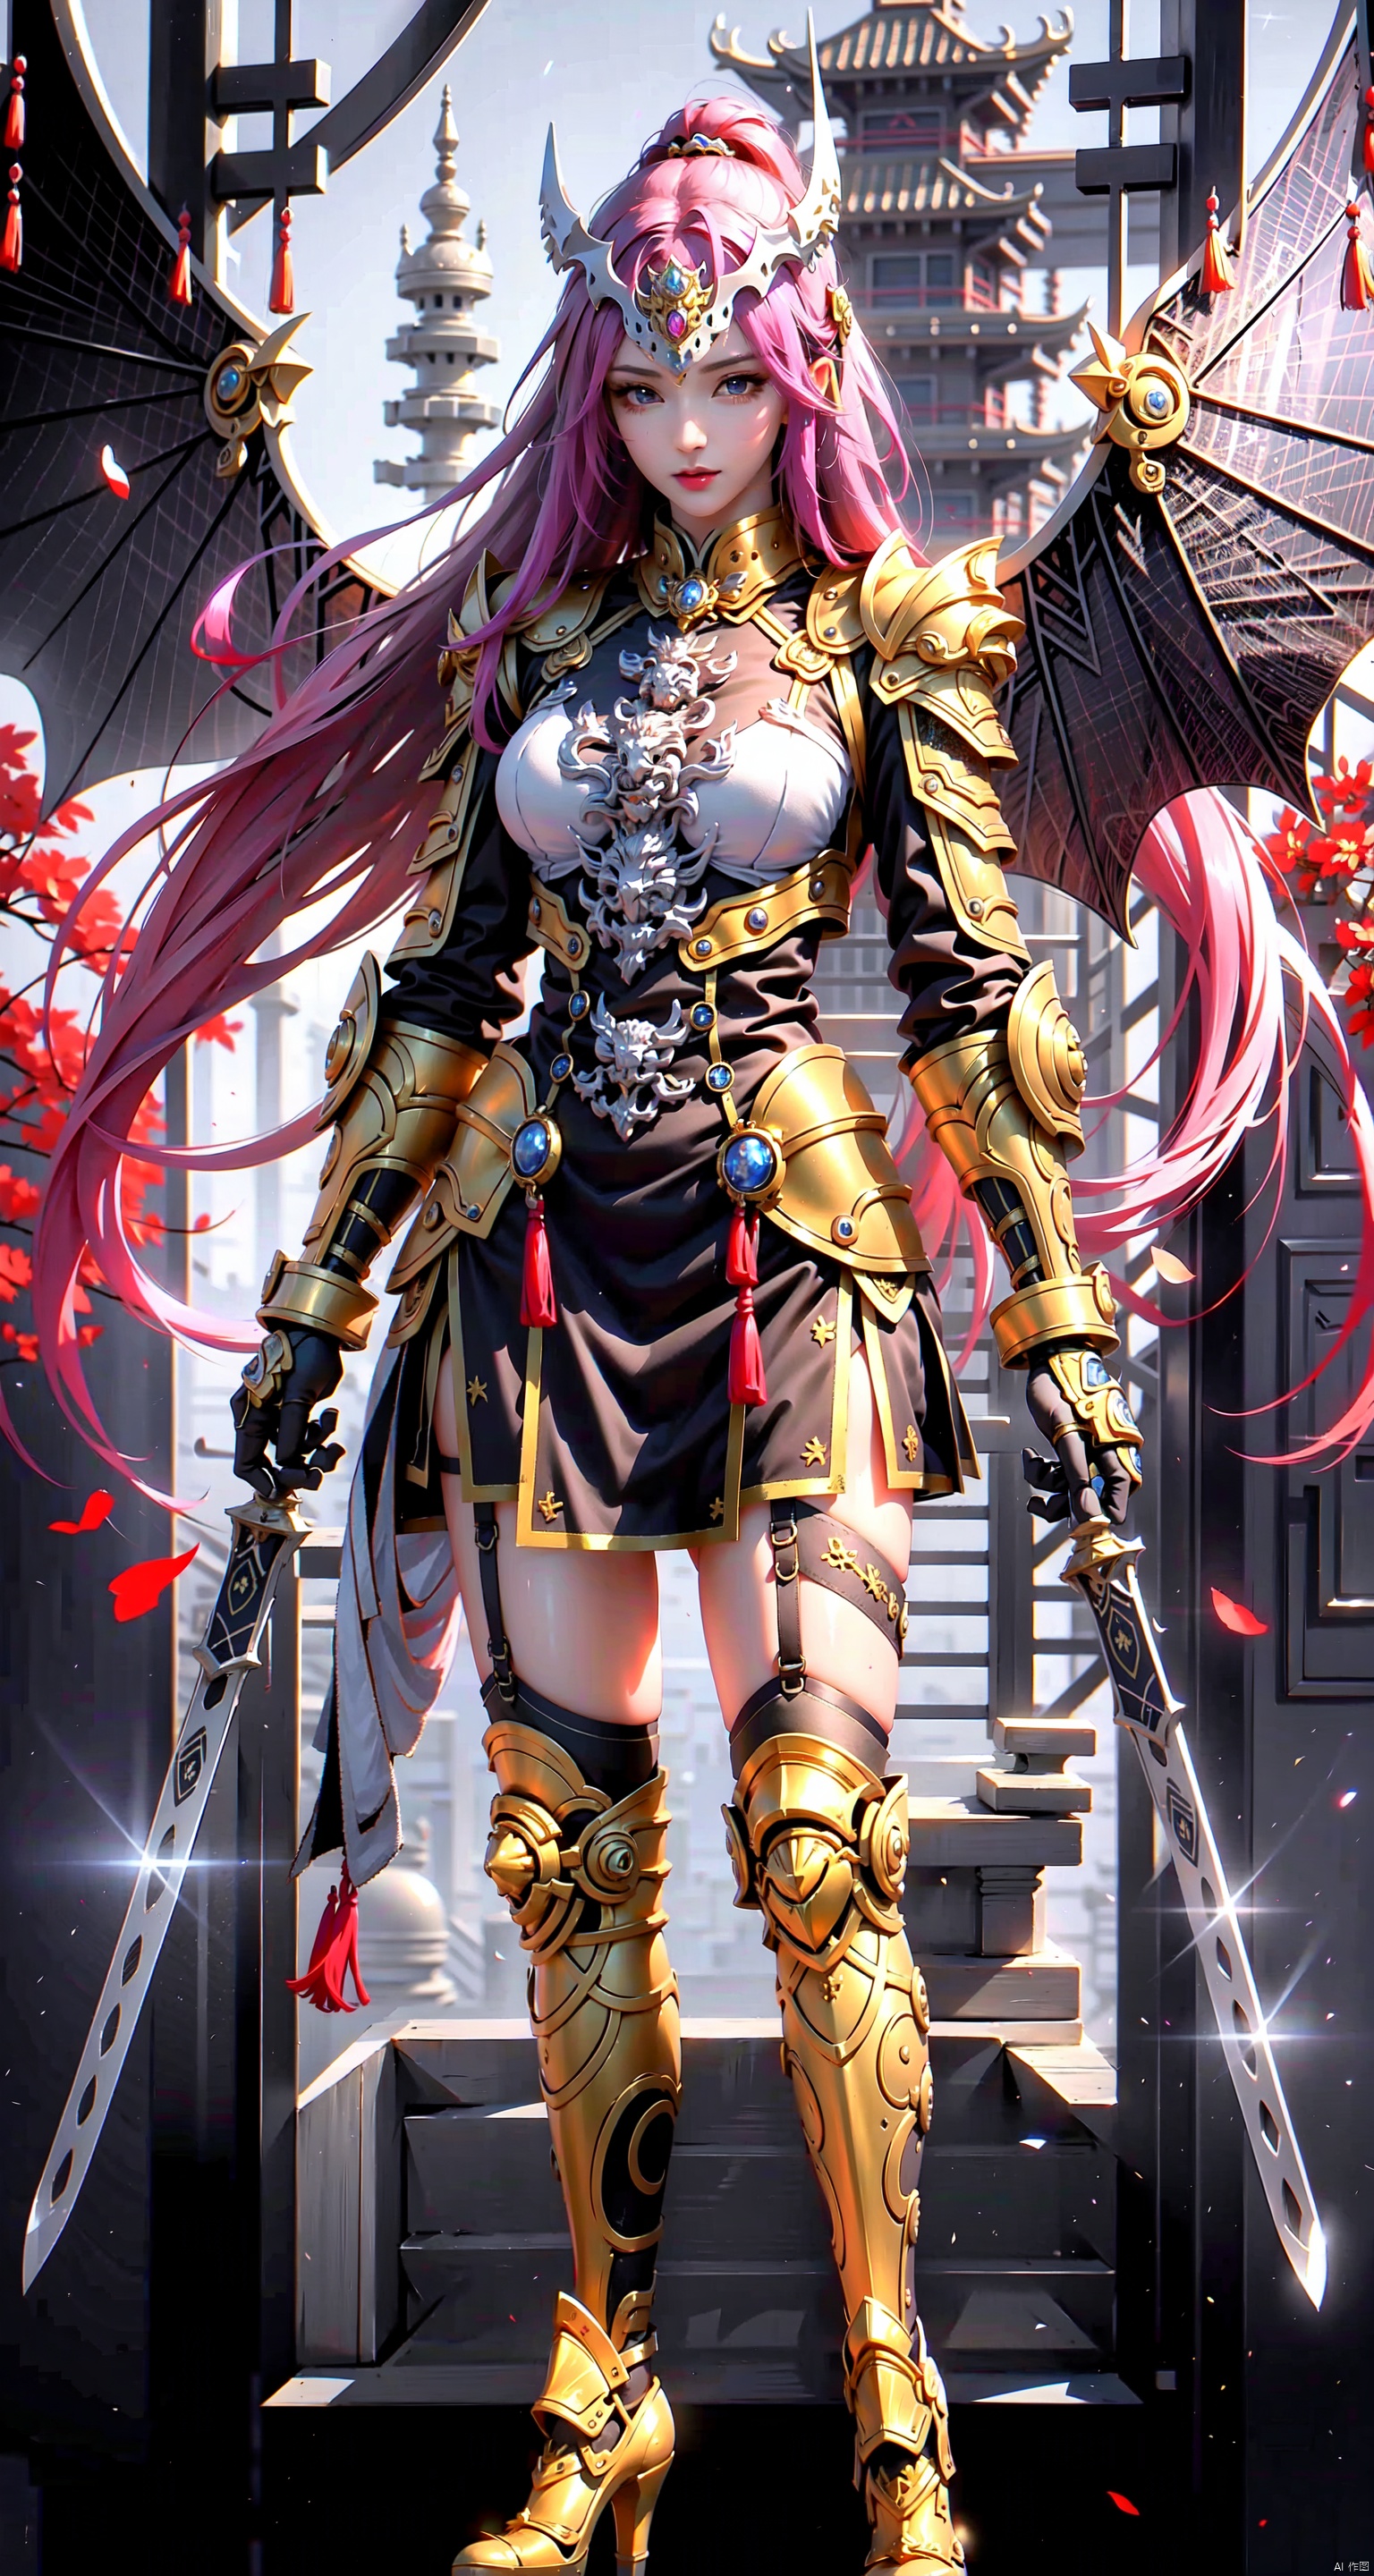  Her armor design is full of classical Chinese elements. The main part of the armor is dark purple, symbolizing the royal honor and majesty. The armor is inlaid with the delicate golden pattern of the dragon, an ancient Chinese divine animal representing strength and wisdom. At the same time, the armor edges and decorative parts are used bright silver, making the overall shape more gorgeous.
On the shoulders and chest of the armor, she is equipped with high-tech armor devices. These devices are made of transparent nanomaterials and embedded with complex electronic circuits and microcomputers. These devices can not only provide additional protection, but also analyze combat data in real time to provide tactical advice to female military commanders.
Her weapons also blend classical and technological elements. She carries a long sword with a fine moire, representing the vastness and freedom of the sky. The hilt is a modern design with a built-in intelligent sensing system that adjusts the weight and balance of the sword according to the female warrior's fighting state.
In addition, her head equipment is also quite distinctive. She wore a helmet modified from an ancient phoenix crown, inset with flashing LED lights, which added visual impact and symbolized the perfect combination of technology and tradition.
1 gril,masterpiece,full body,standing,
render,technology,4K,Official art, unit 8 k wallpaper, ultra detailed, beautiful and aesthetic, masterpiece, best quality, extremely detailed, science fiction,CG,